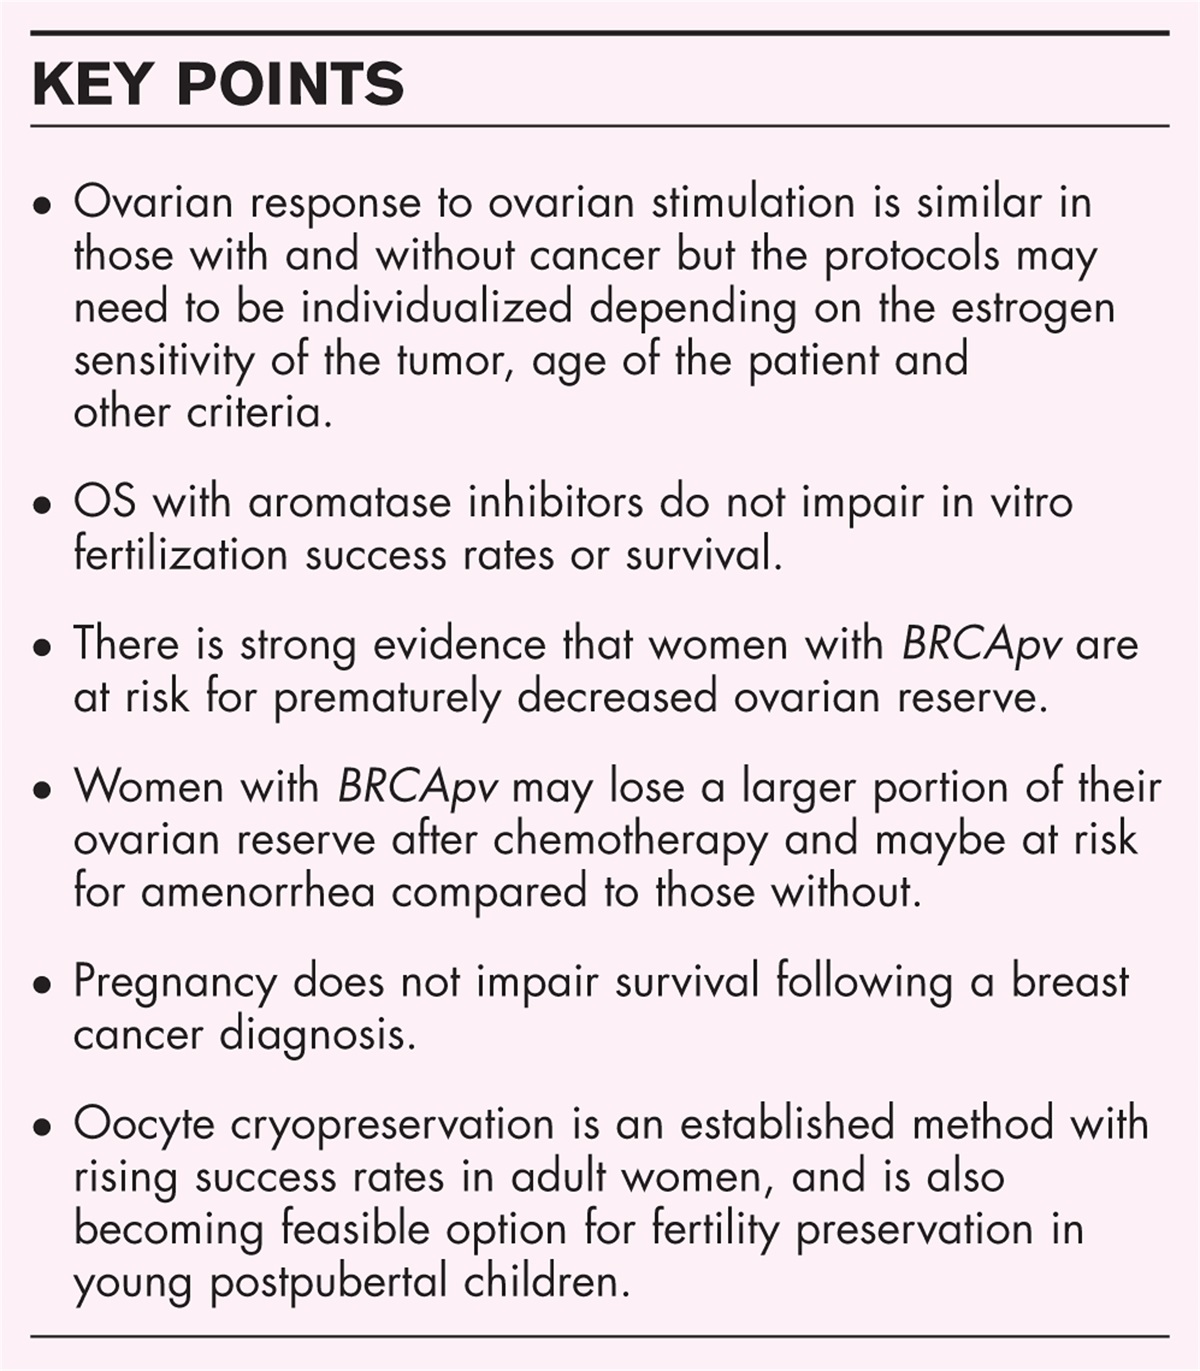 Ovarian stimulation and oocyte cryopreservation in females with cancer